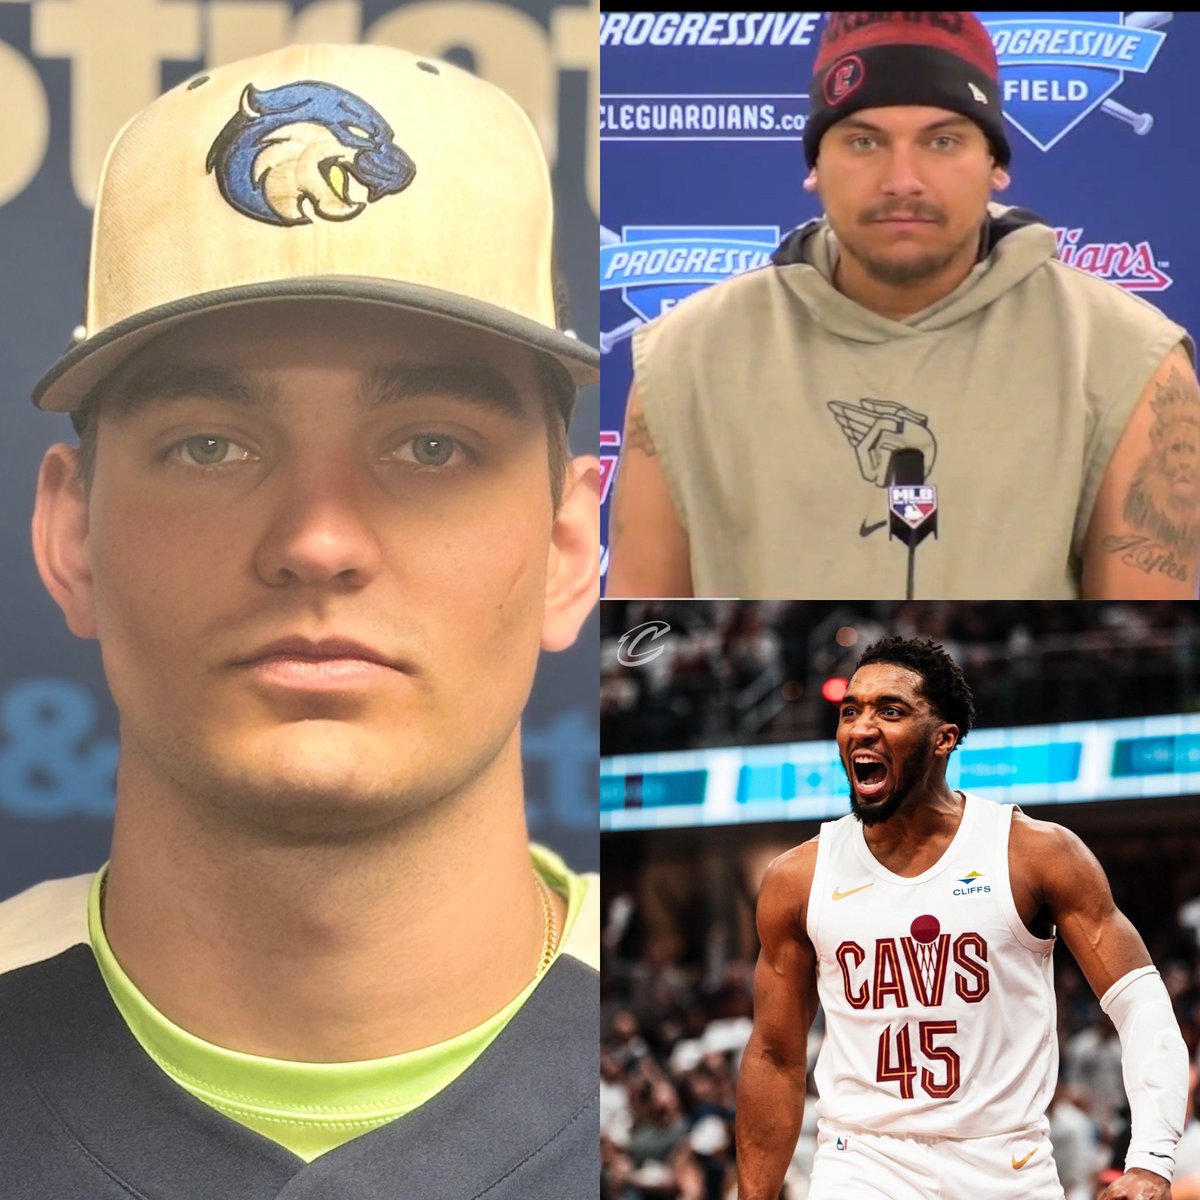 Just 3 CLE dudes that brought the 🔥 this weekend #ForTheLand and they all #LetEmKnow @BSCBobcatsOH @CleGuardians @cavs all with a perfect winning weekend. Here is to another big week ahead with more 💣 on the field and beyond the arc with a few more Ws.